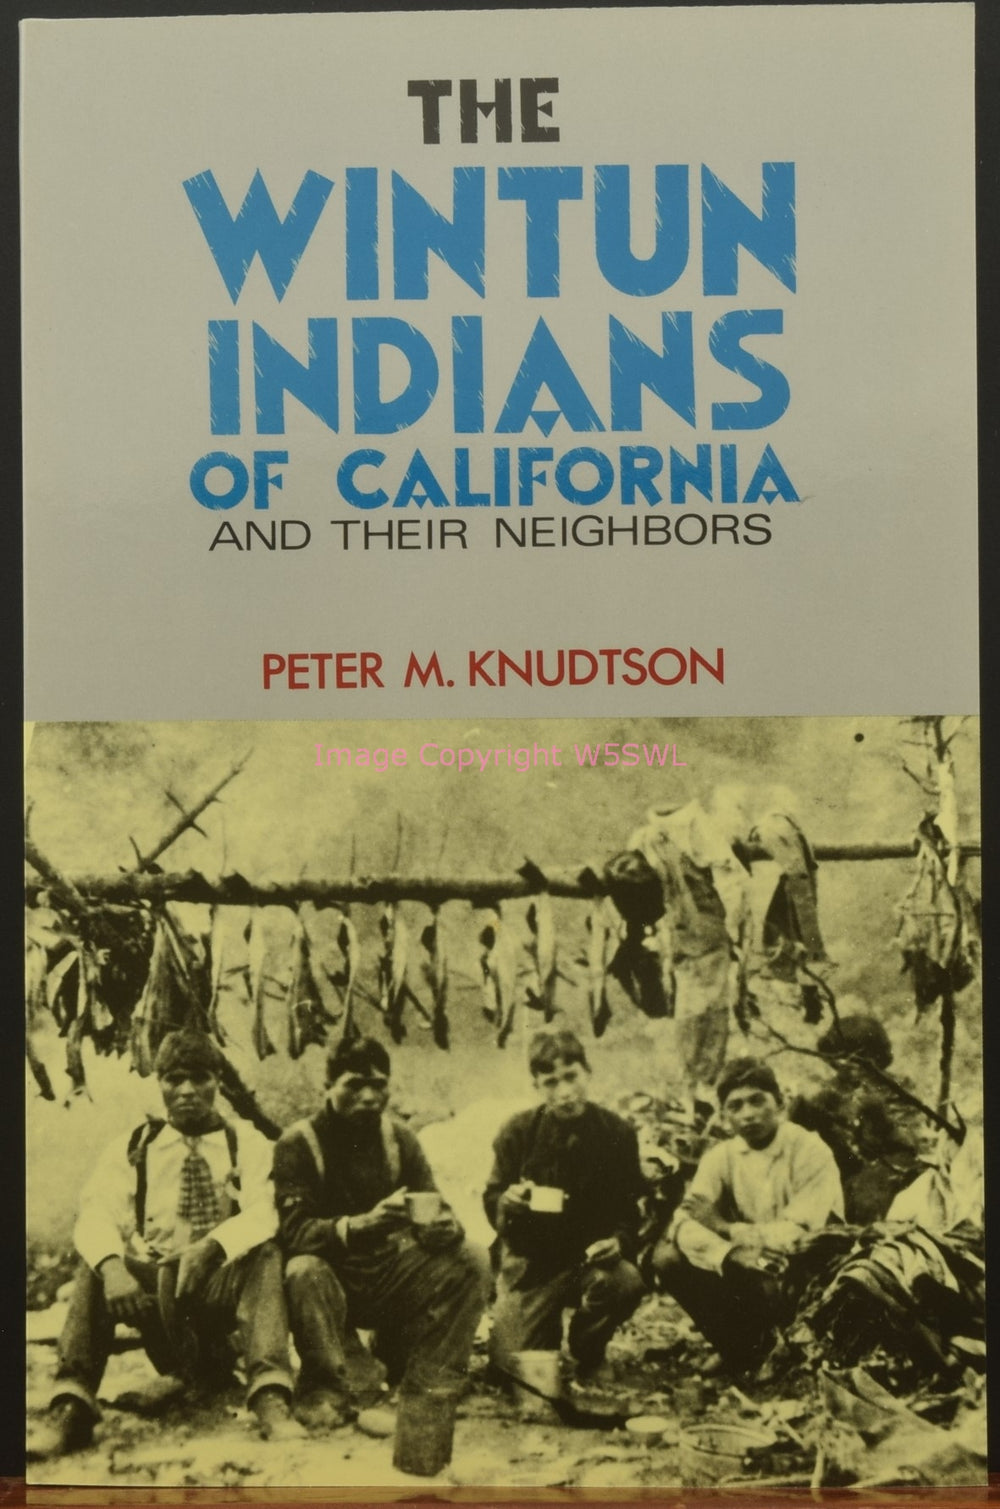 The Wintun Indians Of California And Their Neighbors - Peter Knudtson - Dave's Hobby Shop by W5SWL